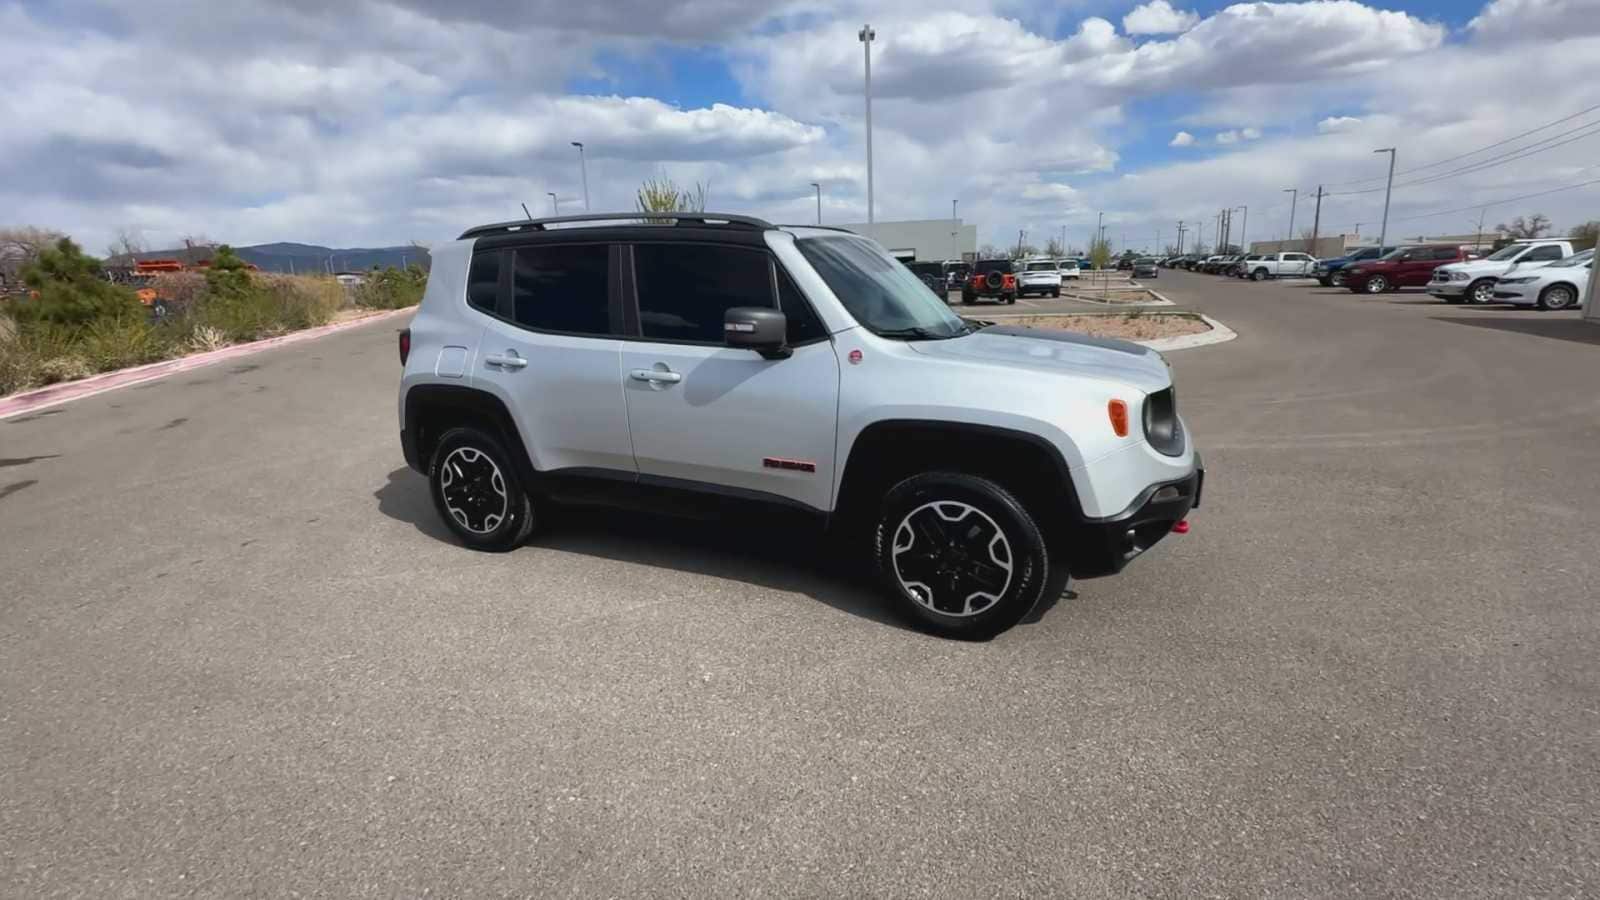 Used 2015 Jeep Renegade Trailhawk with VIN ZACCJBCT0FPB80076 for sale in Santa Fe, NM